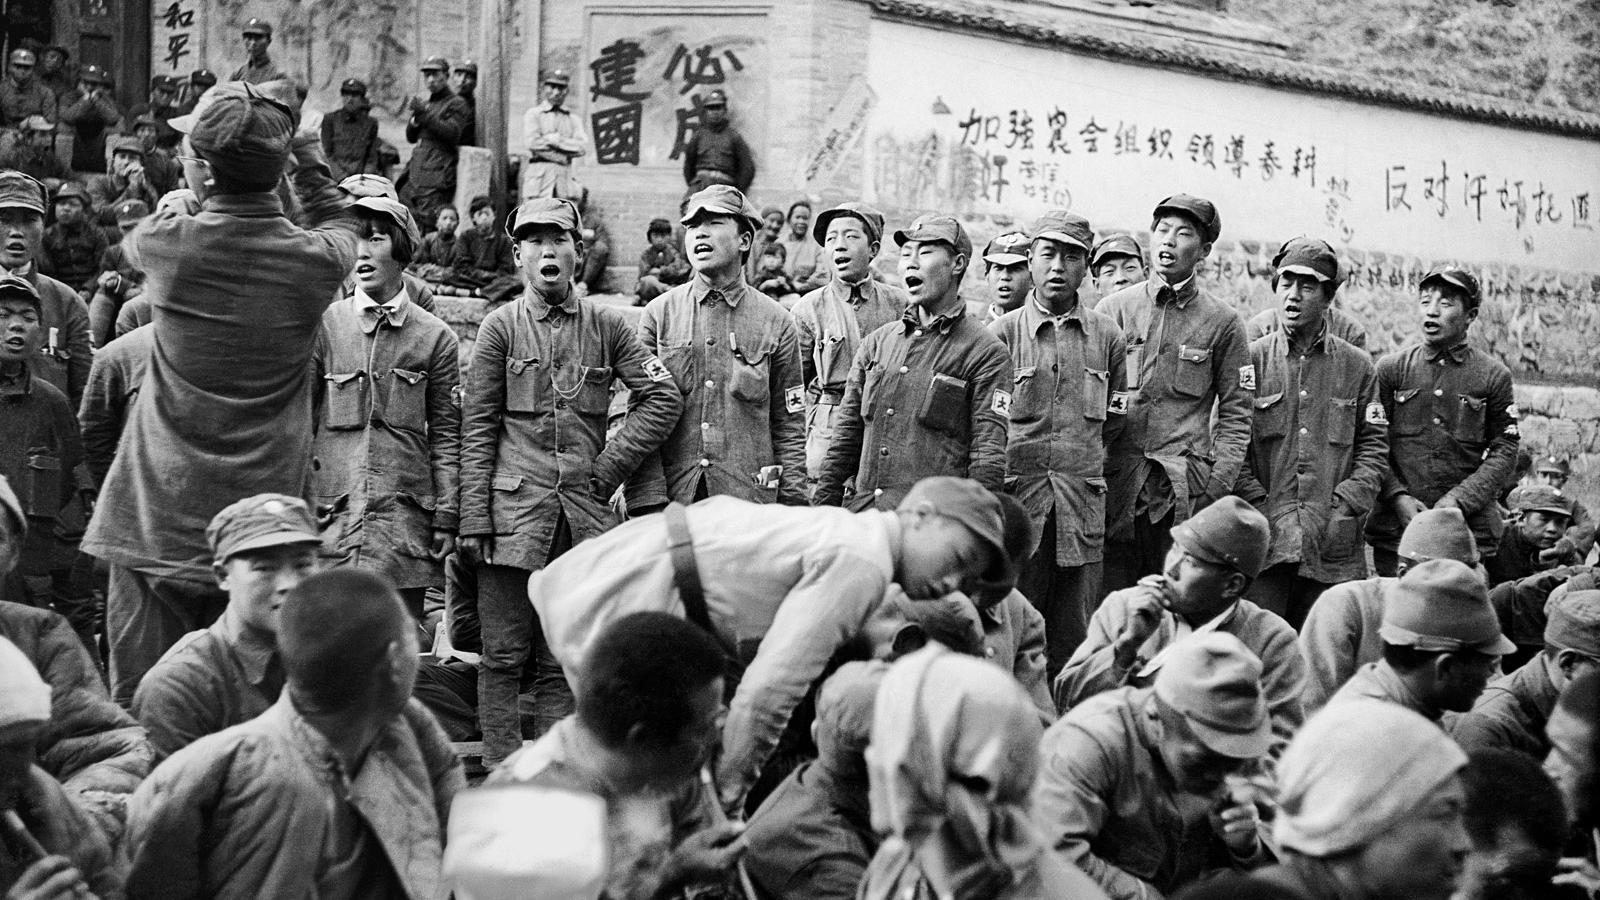 Japanese Captives Singing as They Express Gratitude to Their Communist Captors before Release, 1938